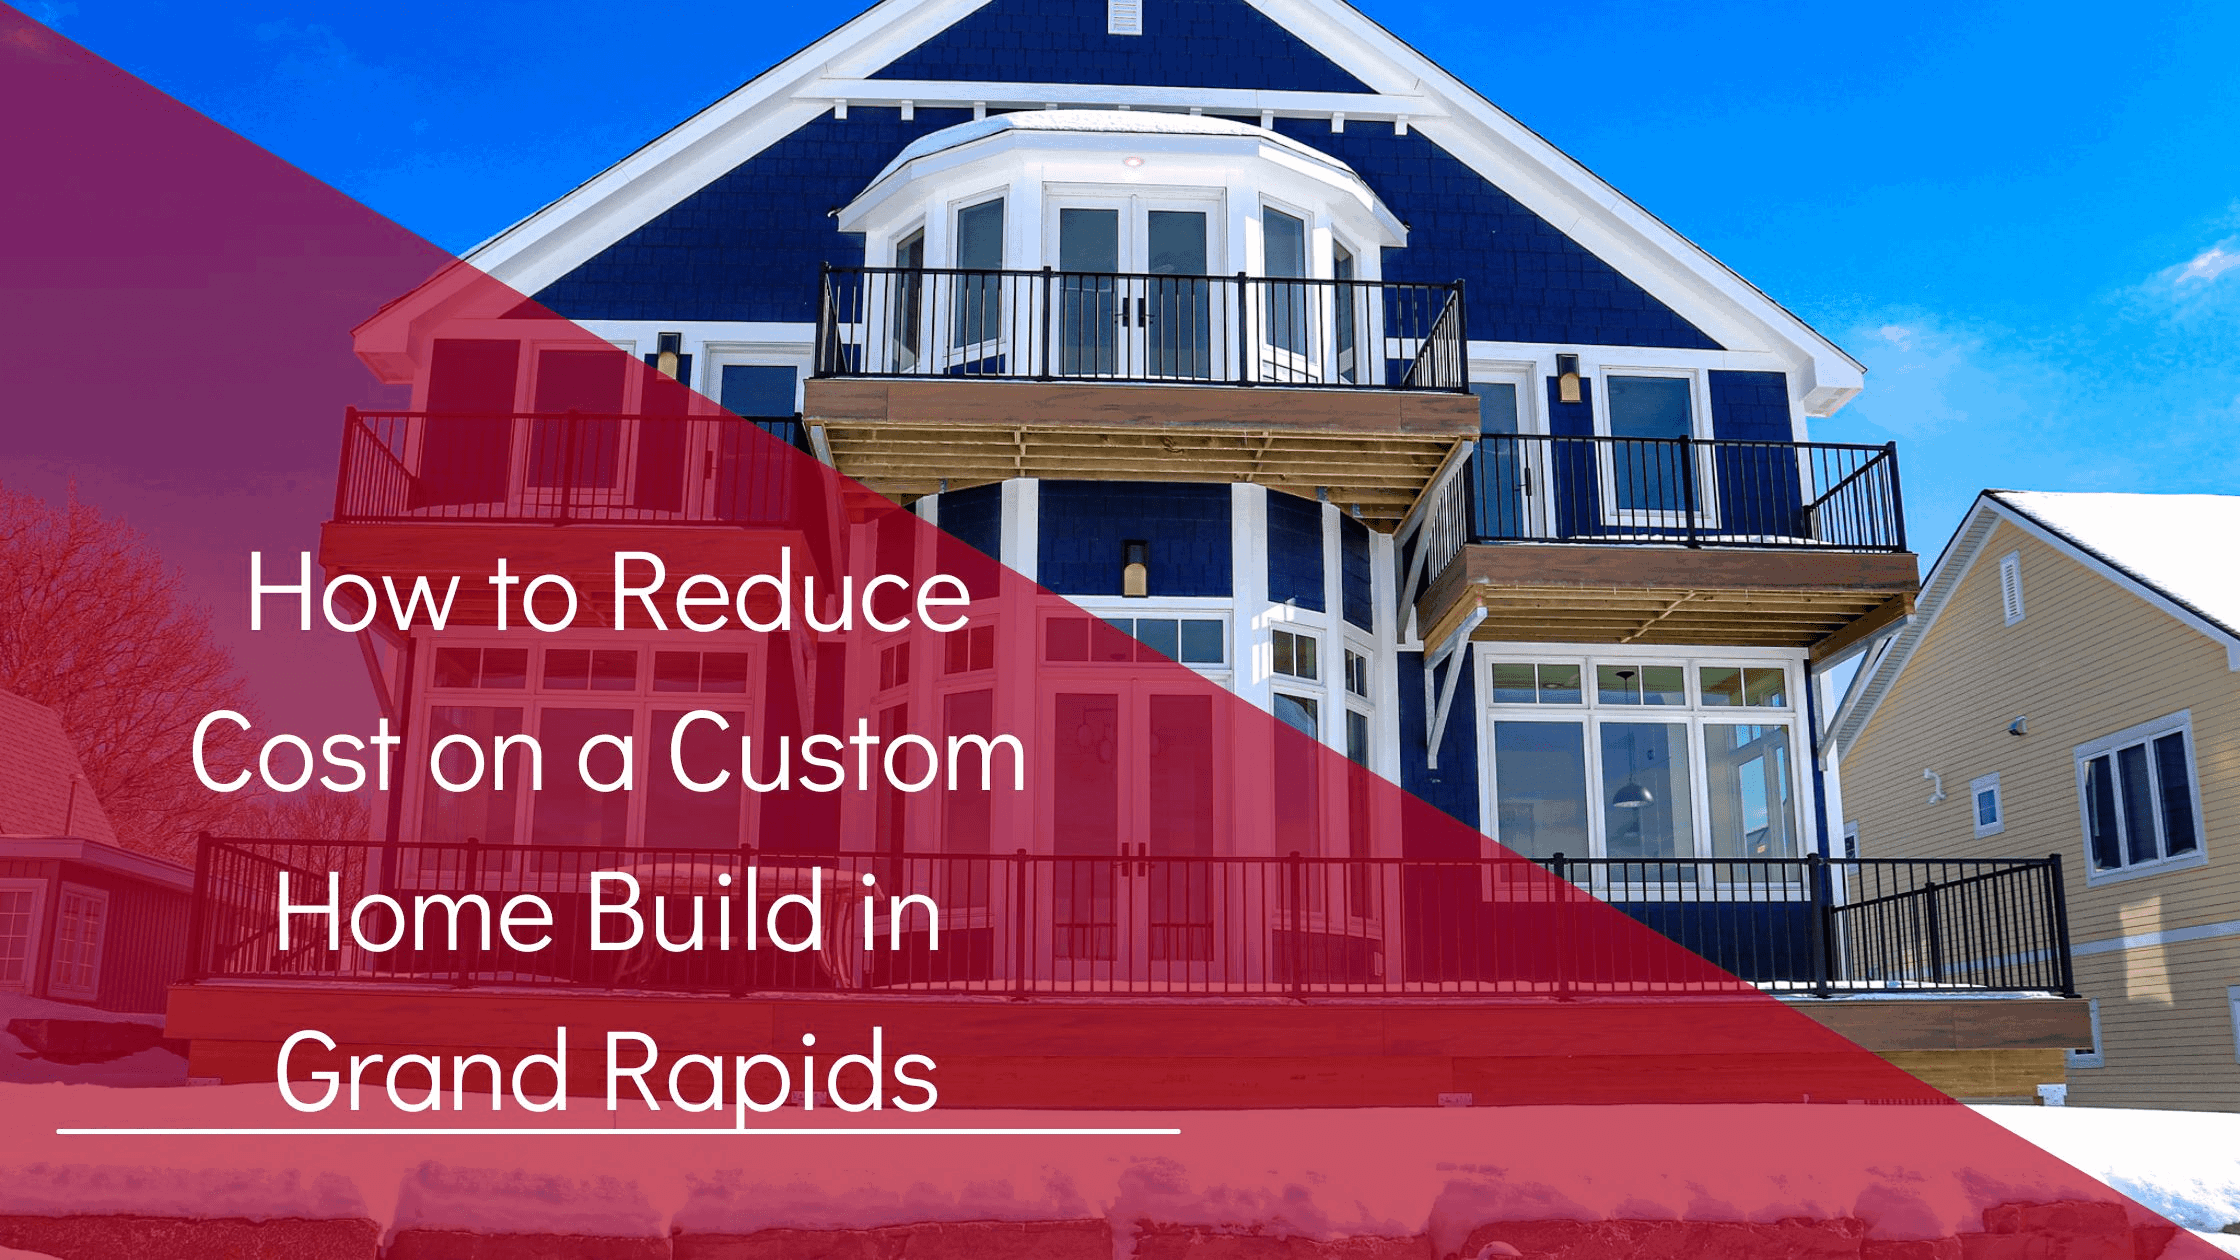 How to Reduce Cost on a Custom Home Build in Grand Rapids